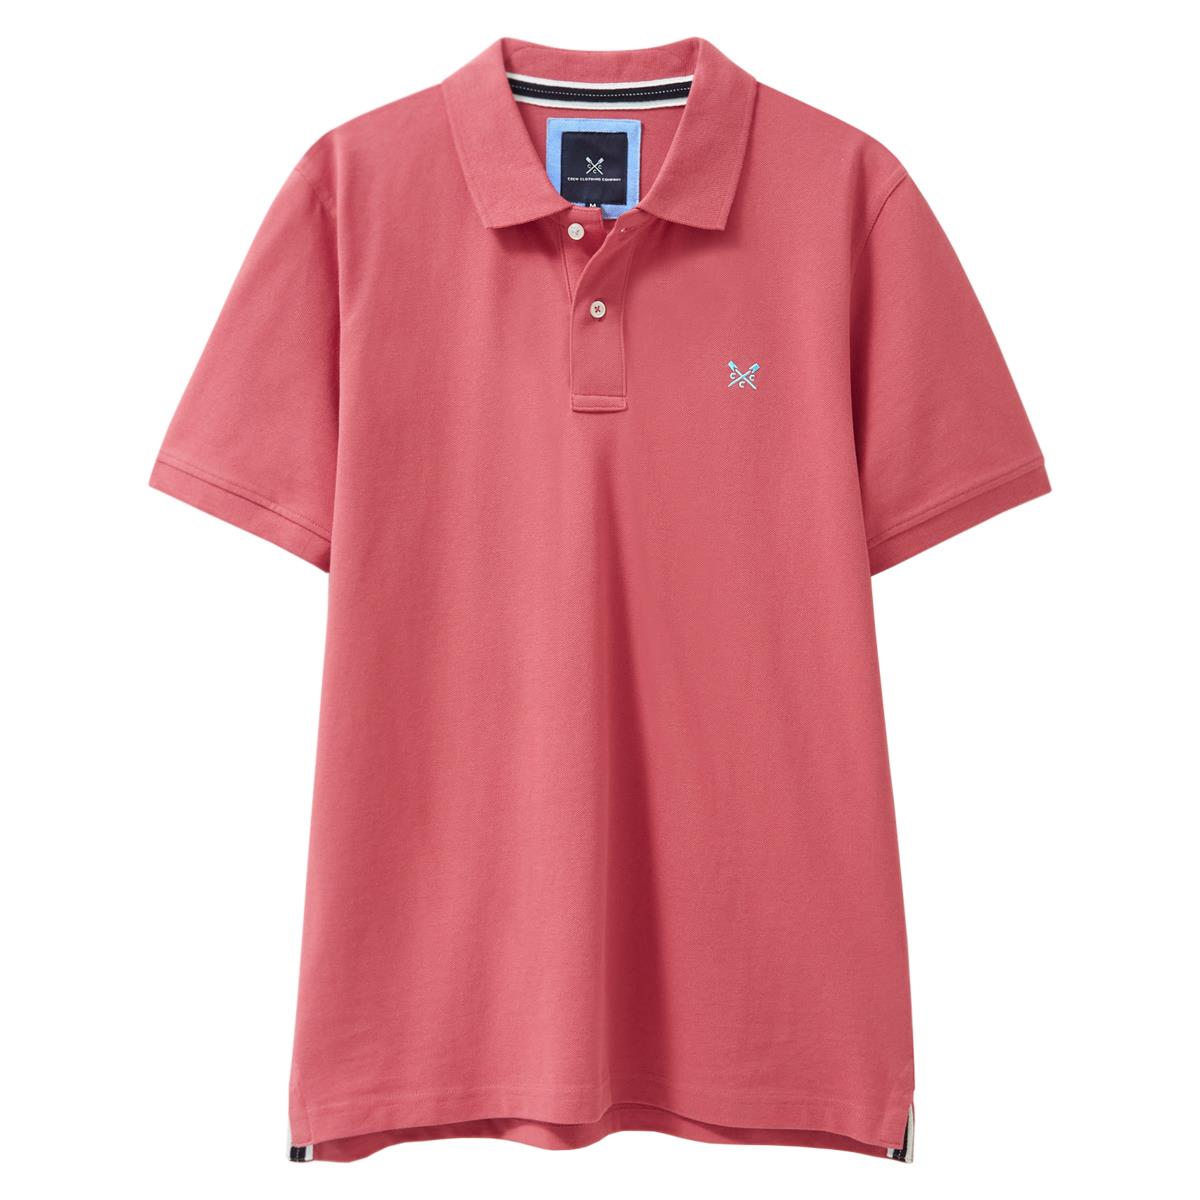 What sizes of crew polo shirts are offered for the Classic Pique Polo?